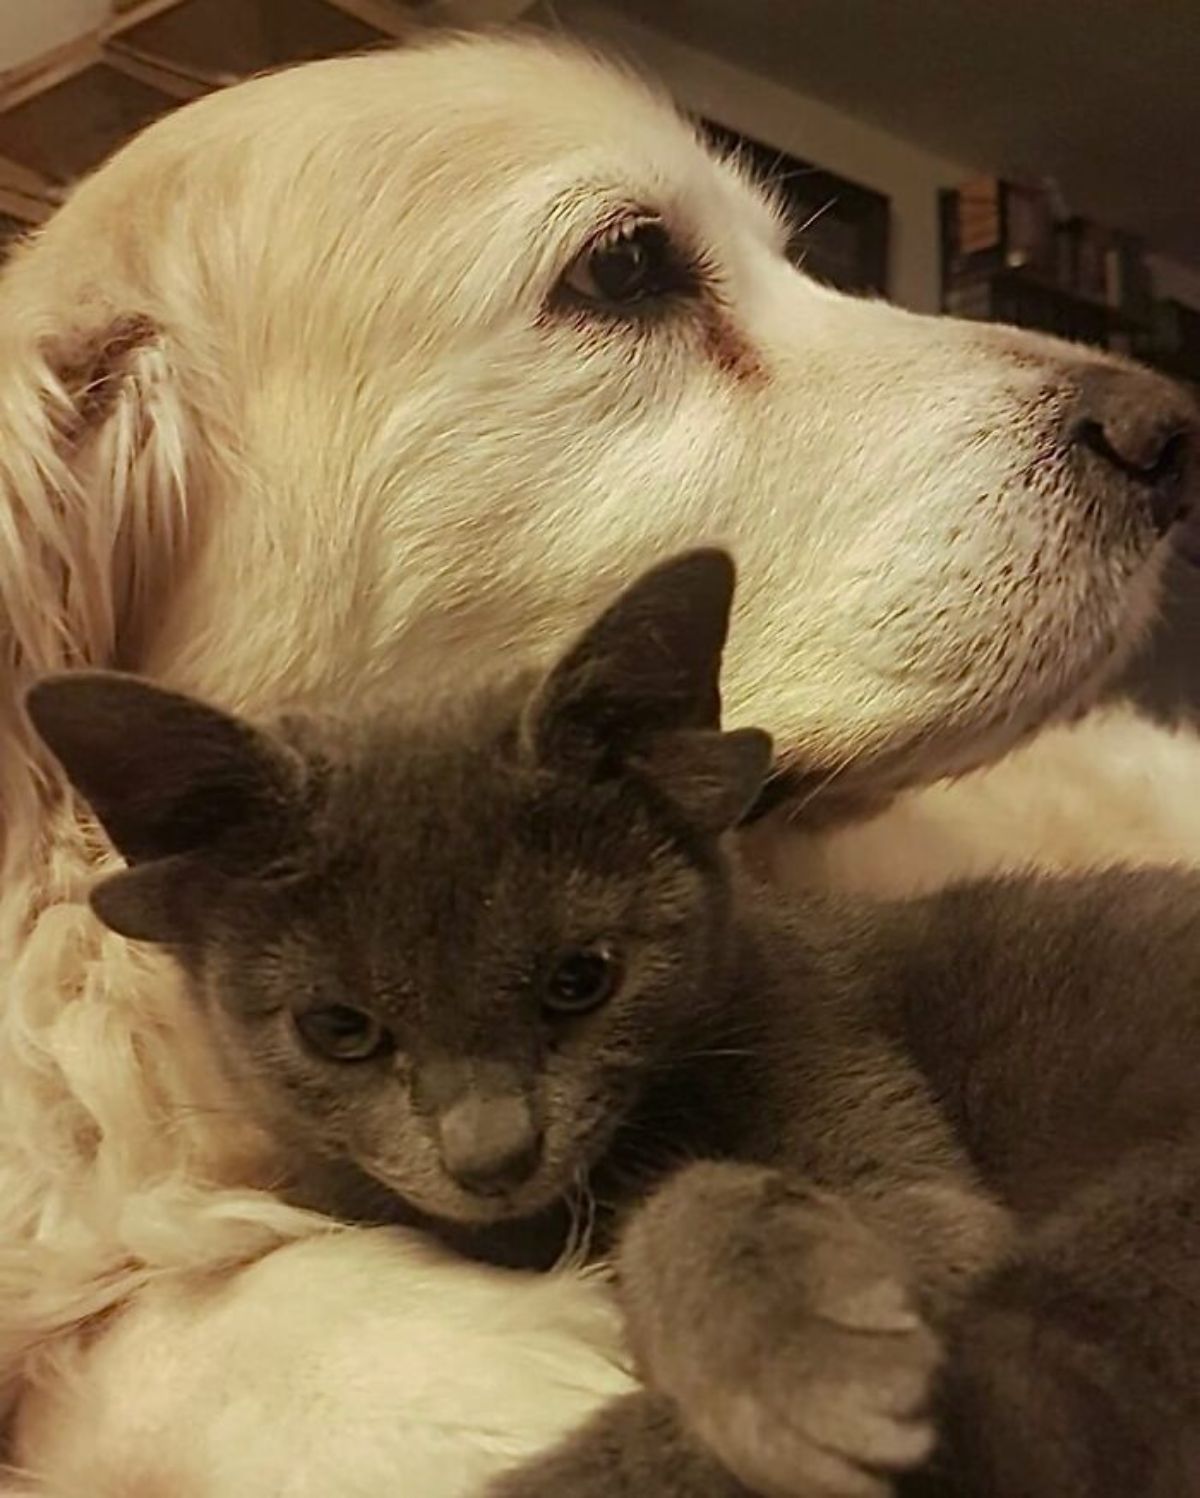 grey kitten with four ears cuddling with a yellow labrador retriever